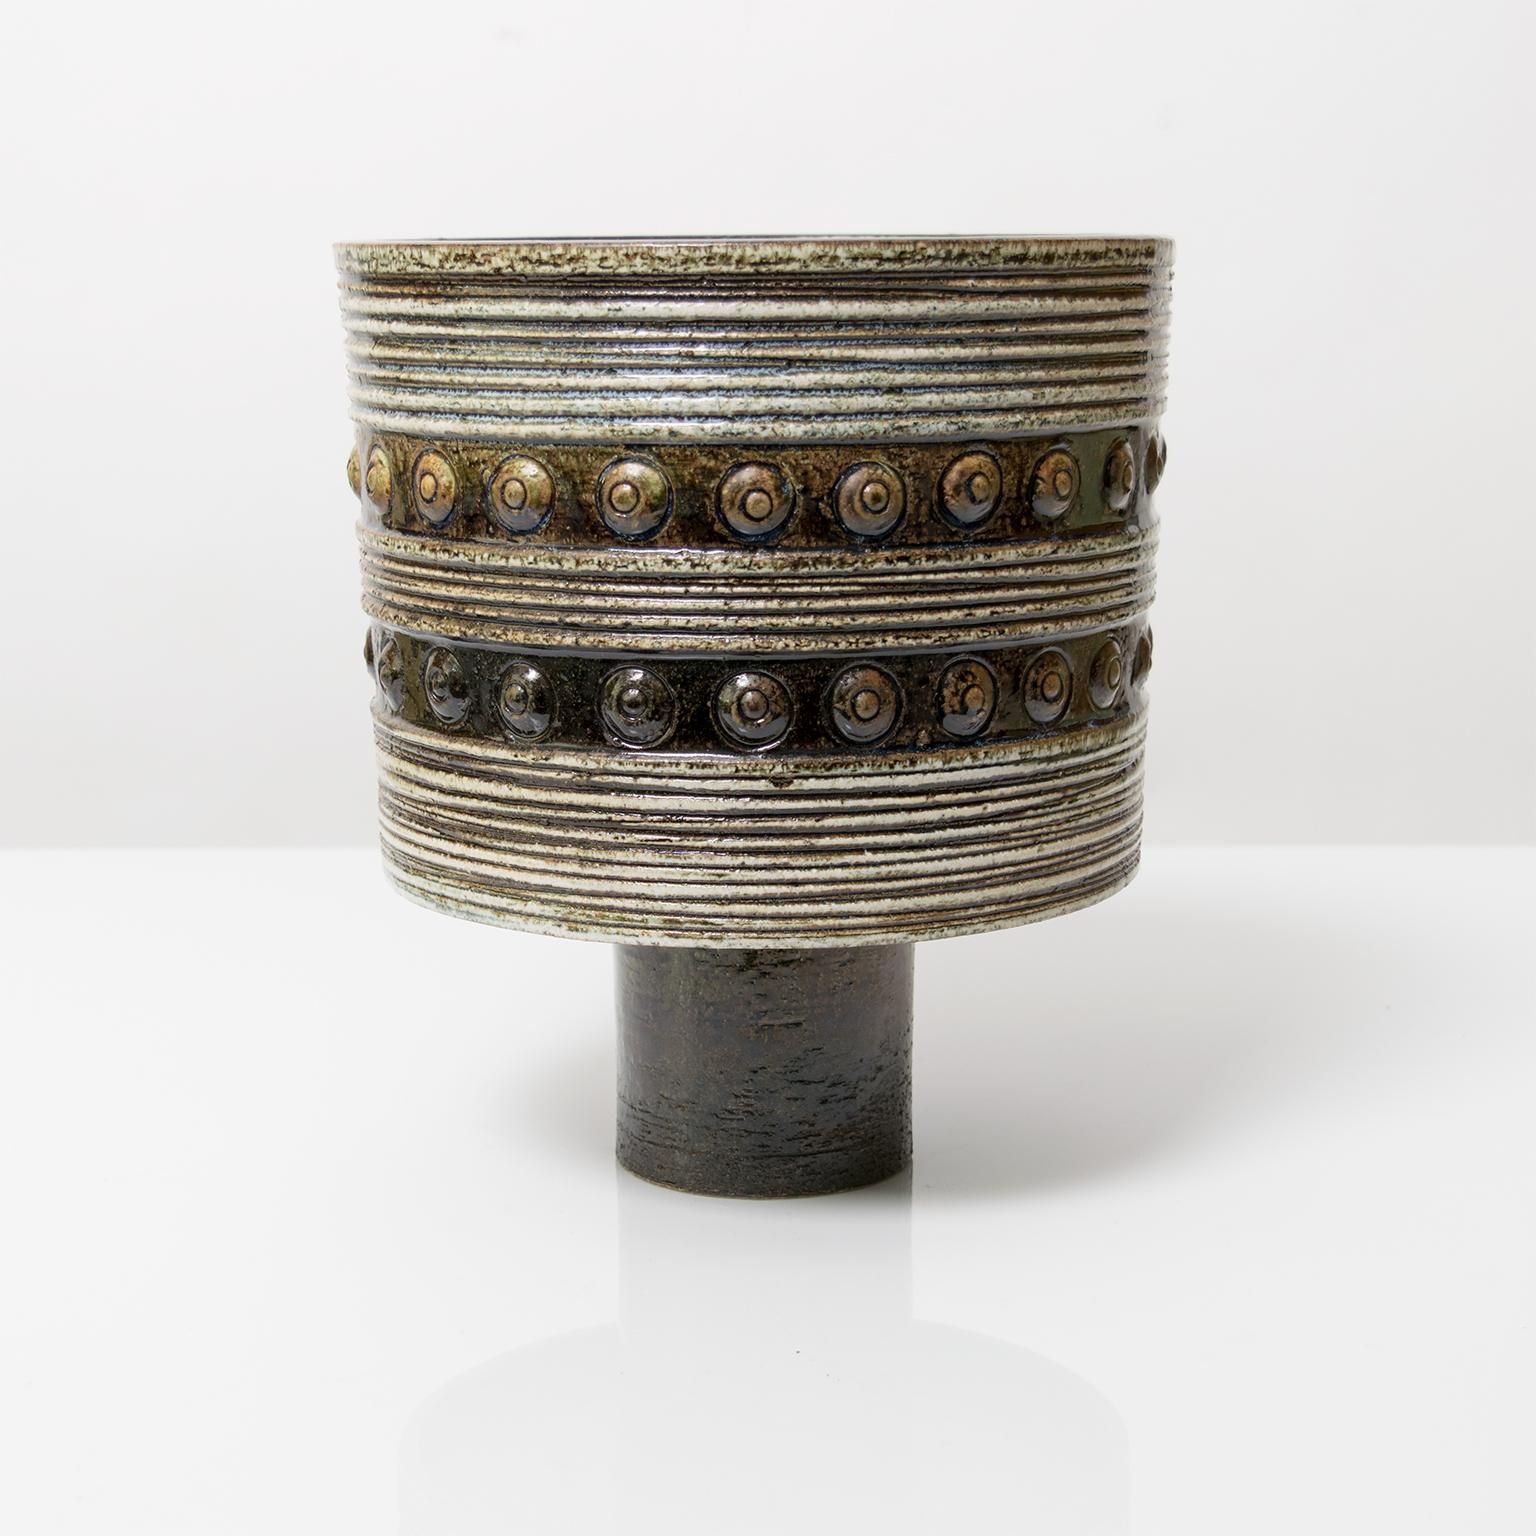 A large Scandinavian Modern studio footed bowl or vase by Britt-Louise Sundell for Gustavsberg, circa 1960. This piece is highly textured with horizontal grooves, circles and glazed in earthy, neutral colors and a deep blue inside.

Measures: